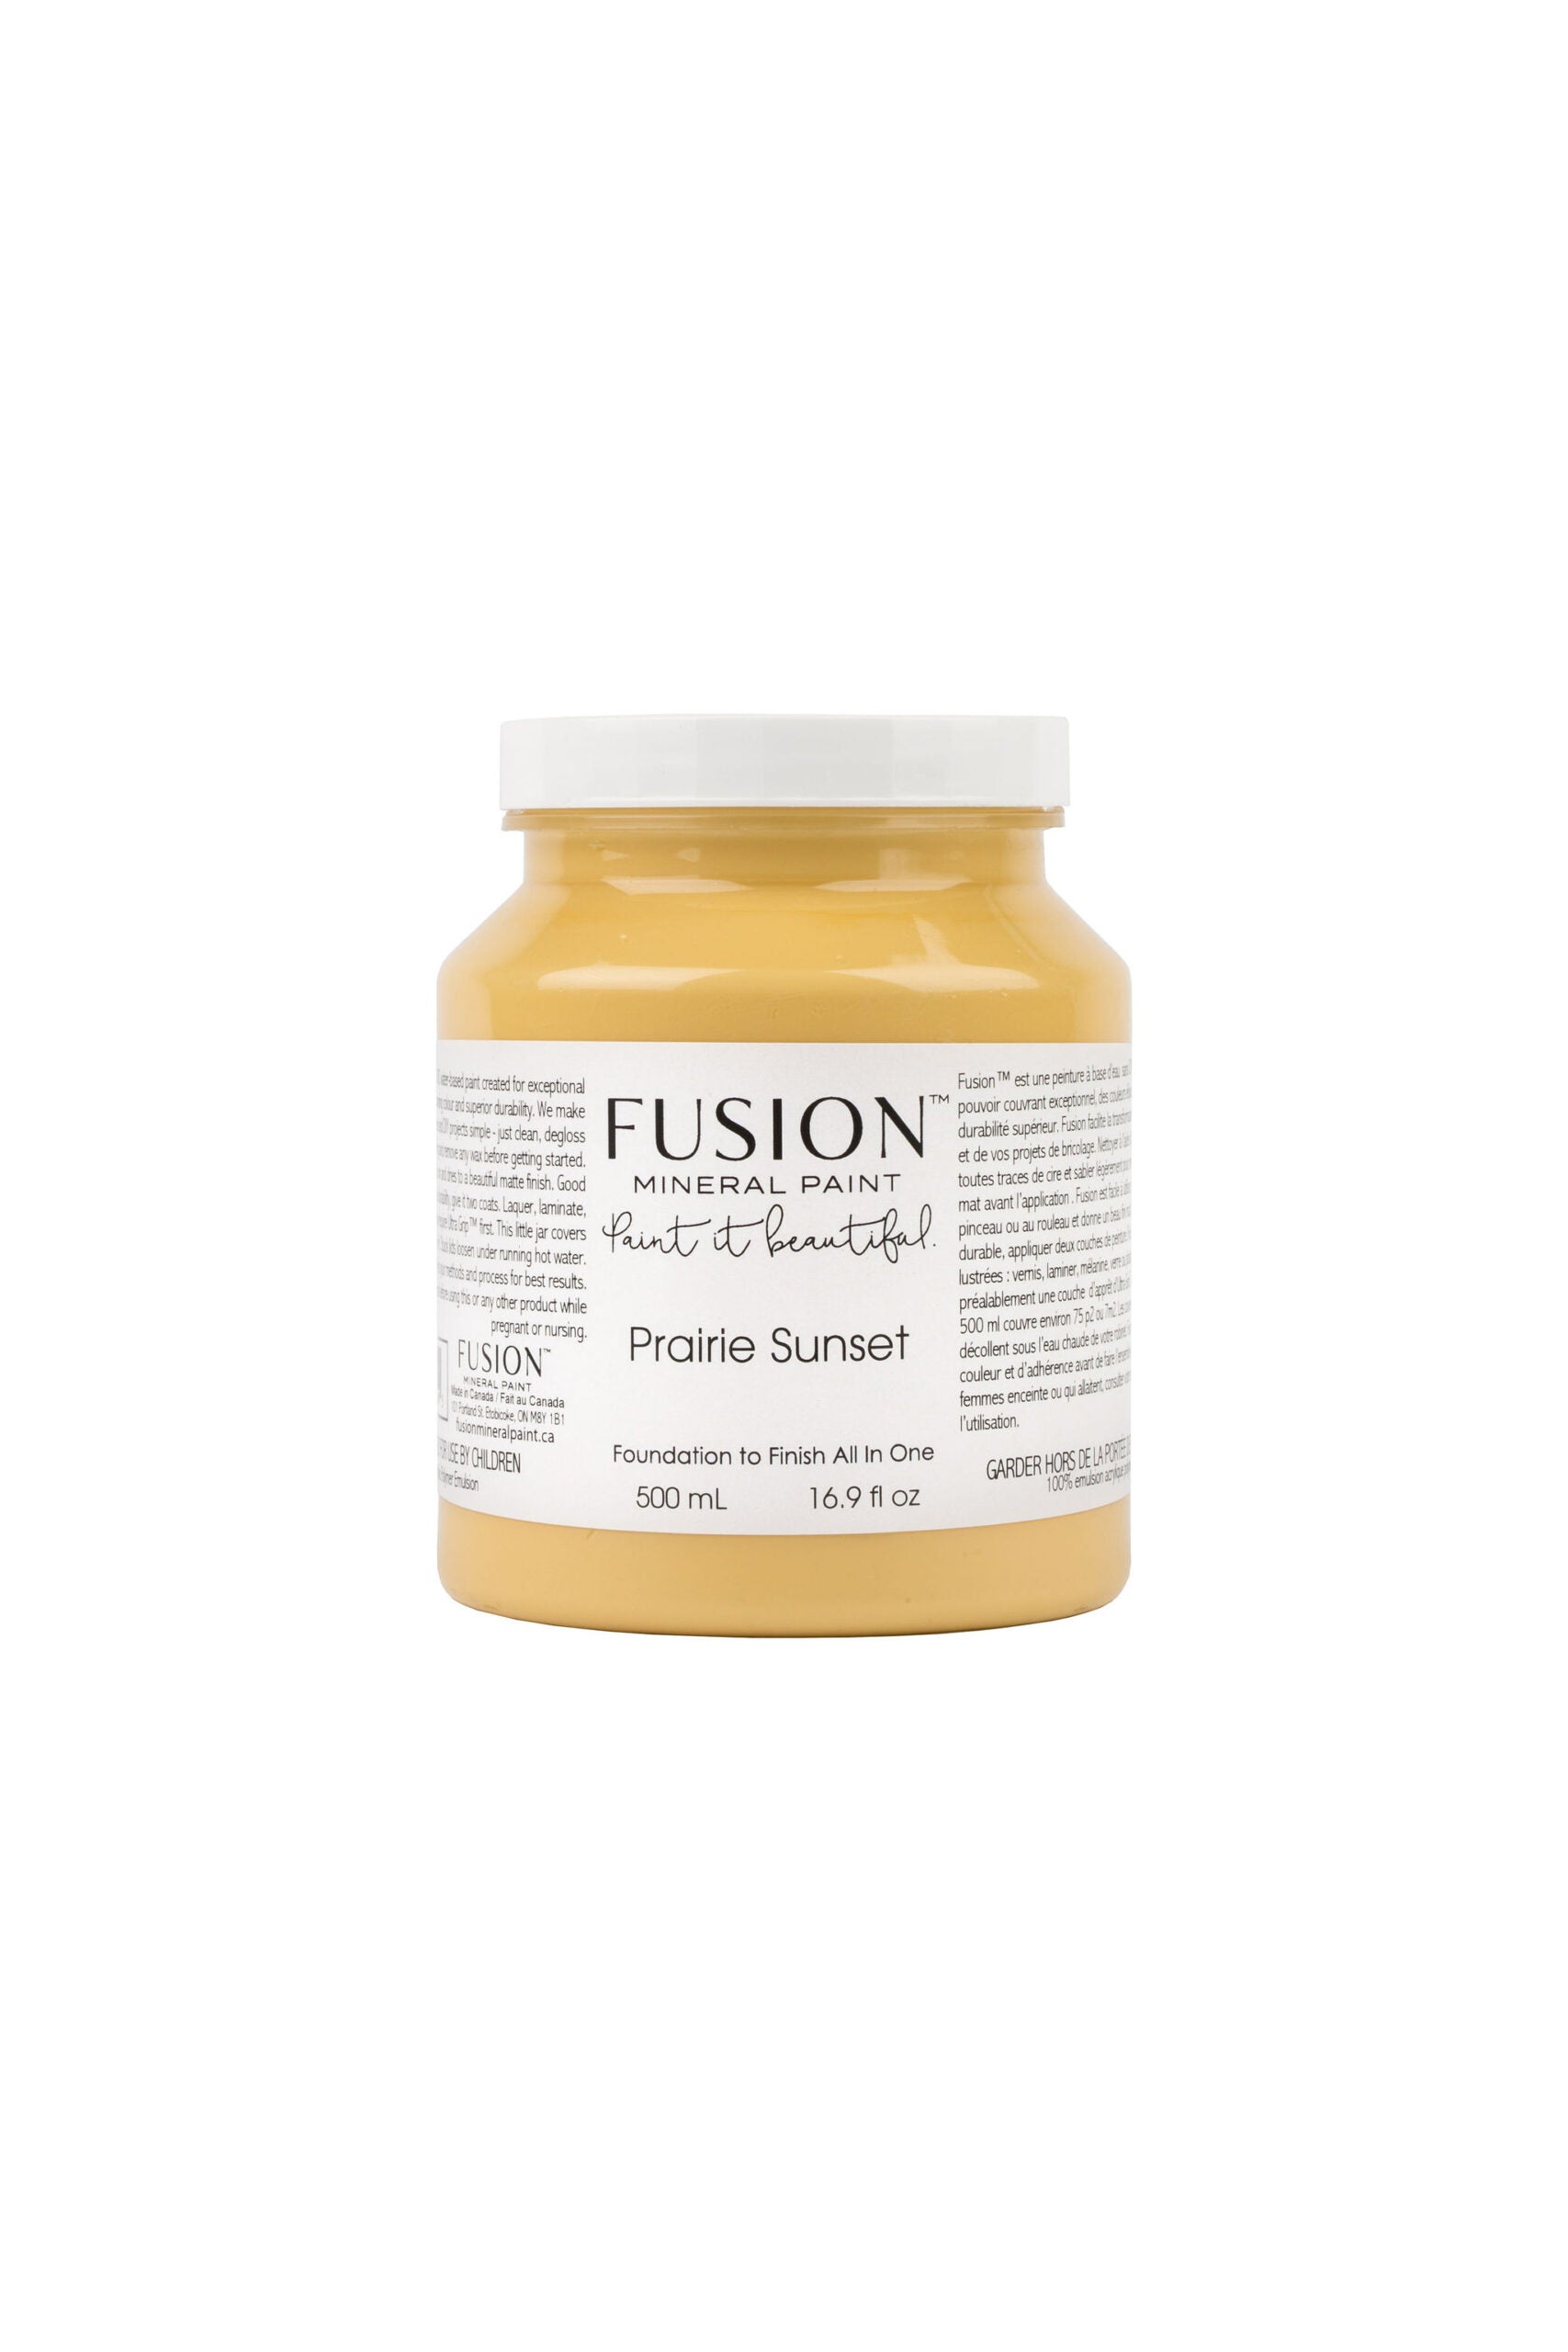 Fusion Mineral Paint PRAIRIE SUNSET | fusion-mineral-paint-prairie-sunset | Fusion Mineral Paint Colours | Refinished P/L